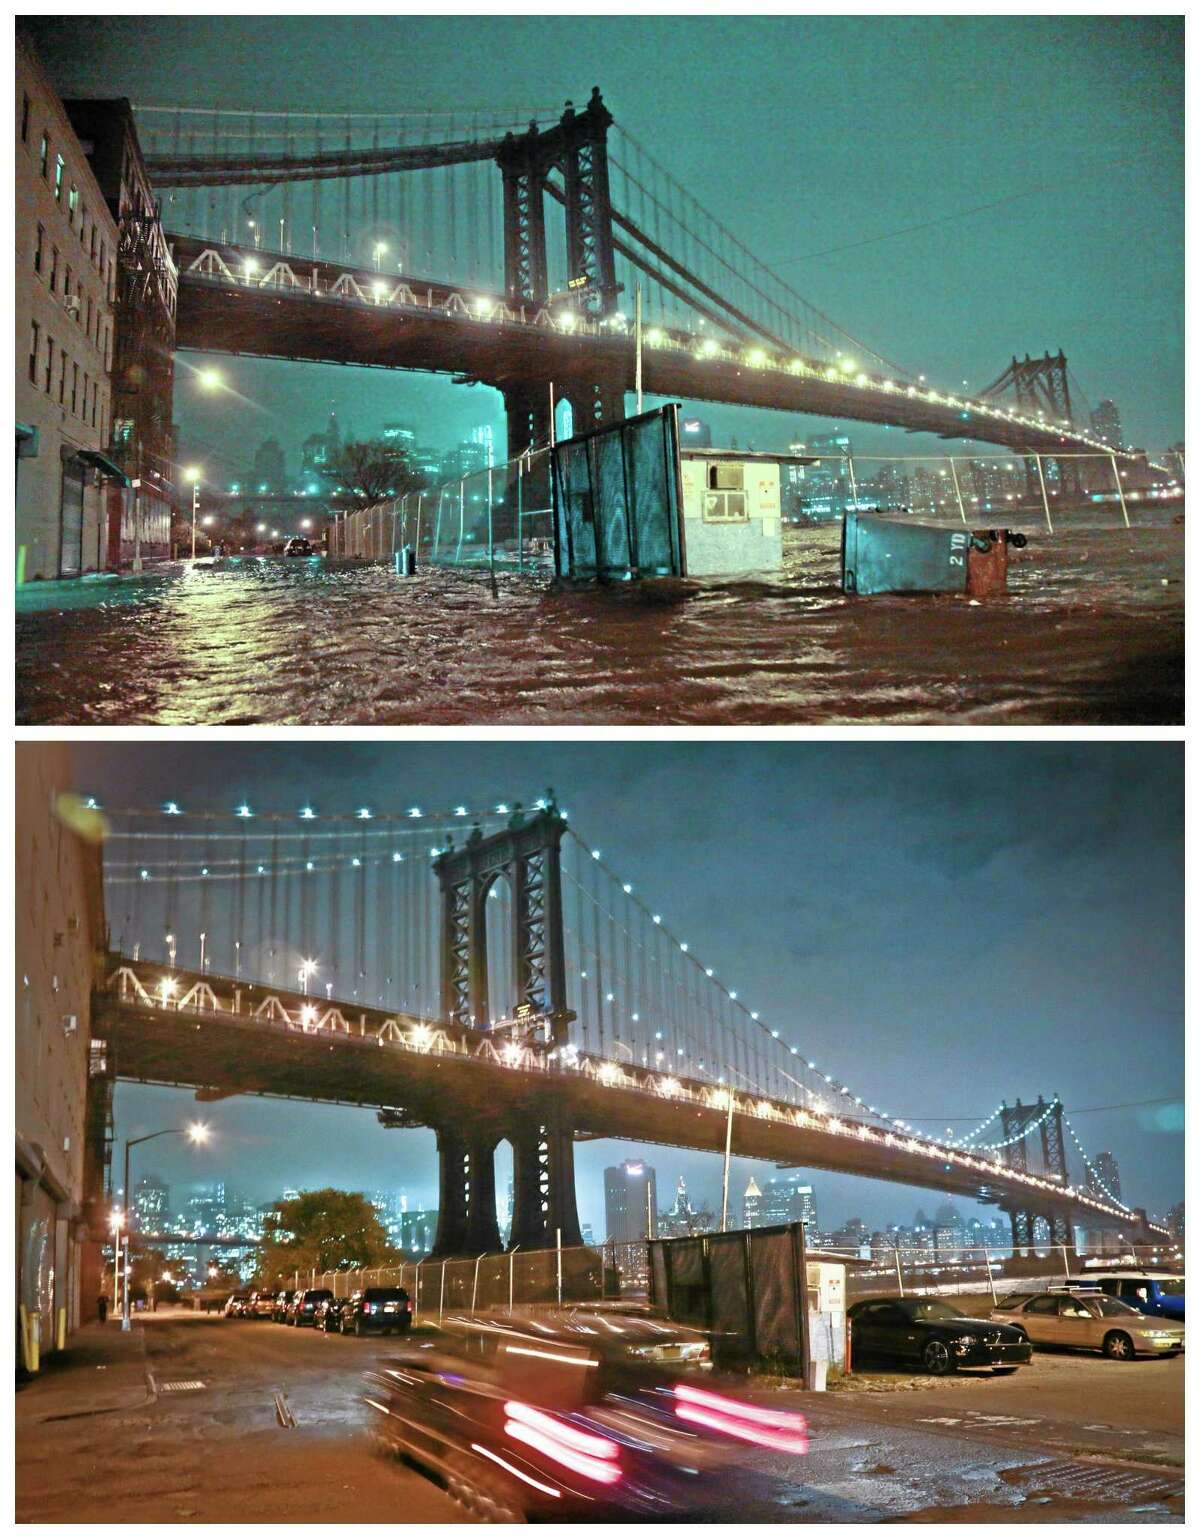 This combination of Monday, Oct. 29, 2012 and Thursday, Oct. 17, 2013 photos shows flooded streets under the Manhattan Bridge in the Dumbo section of Brooklyn, New York in the wake of Superstorm Sandy and the same site nearly a year later. (AP Photo/Bebeto Matthews)